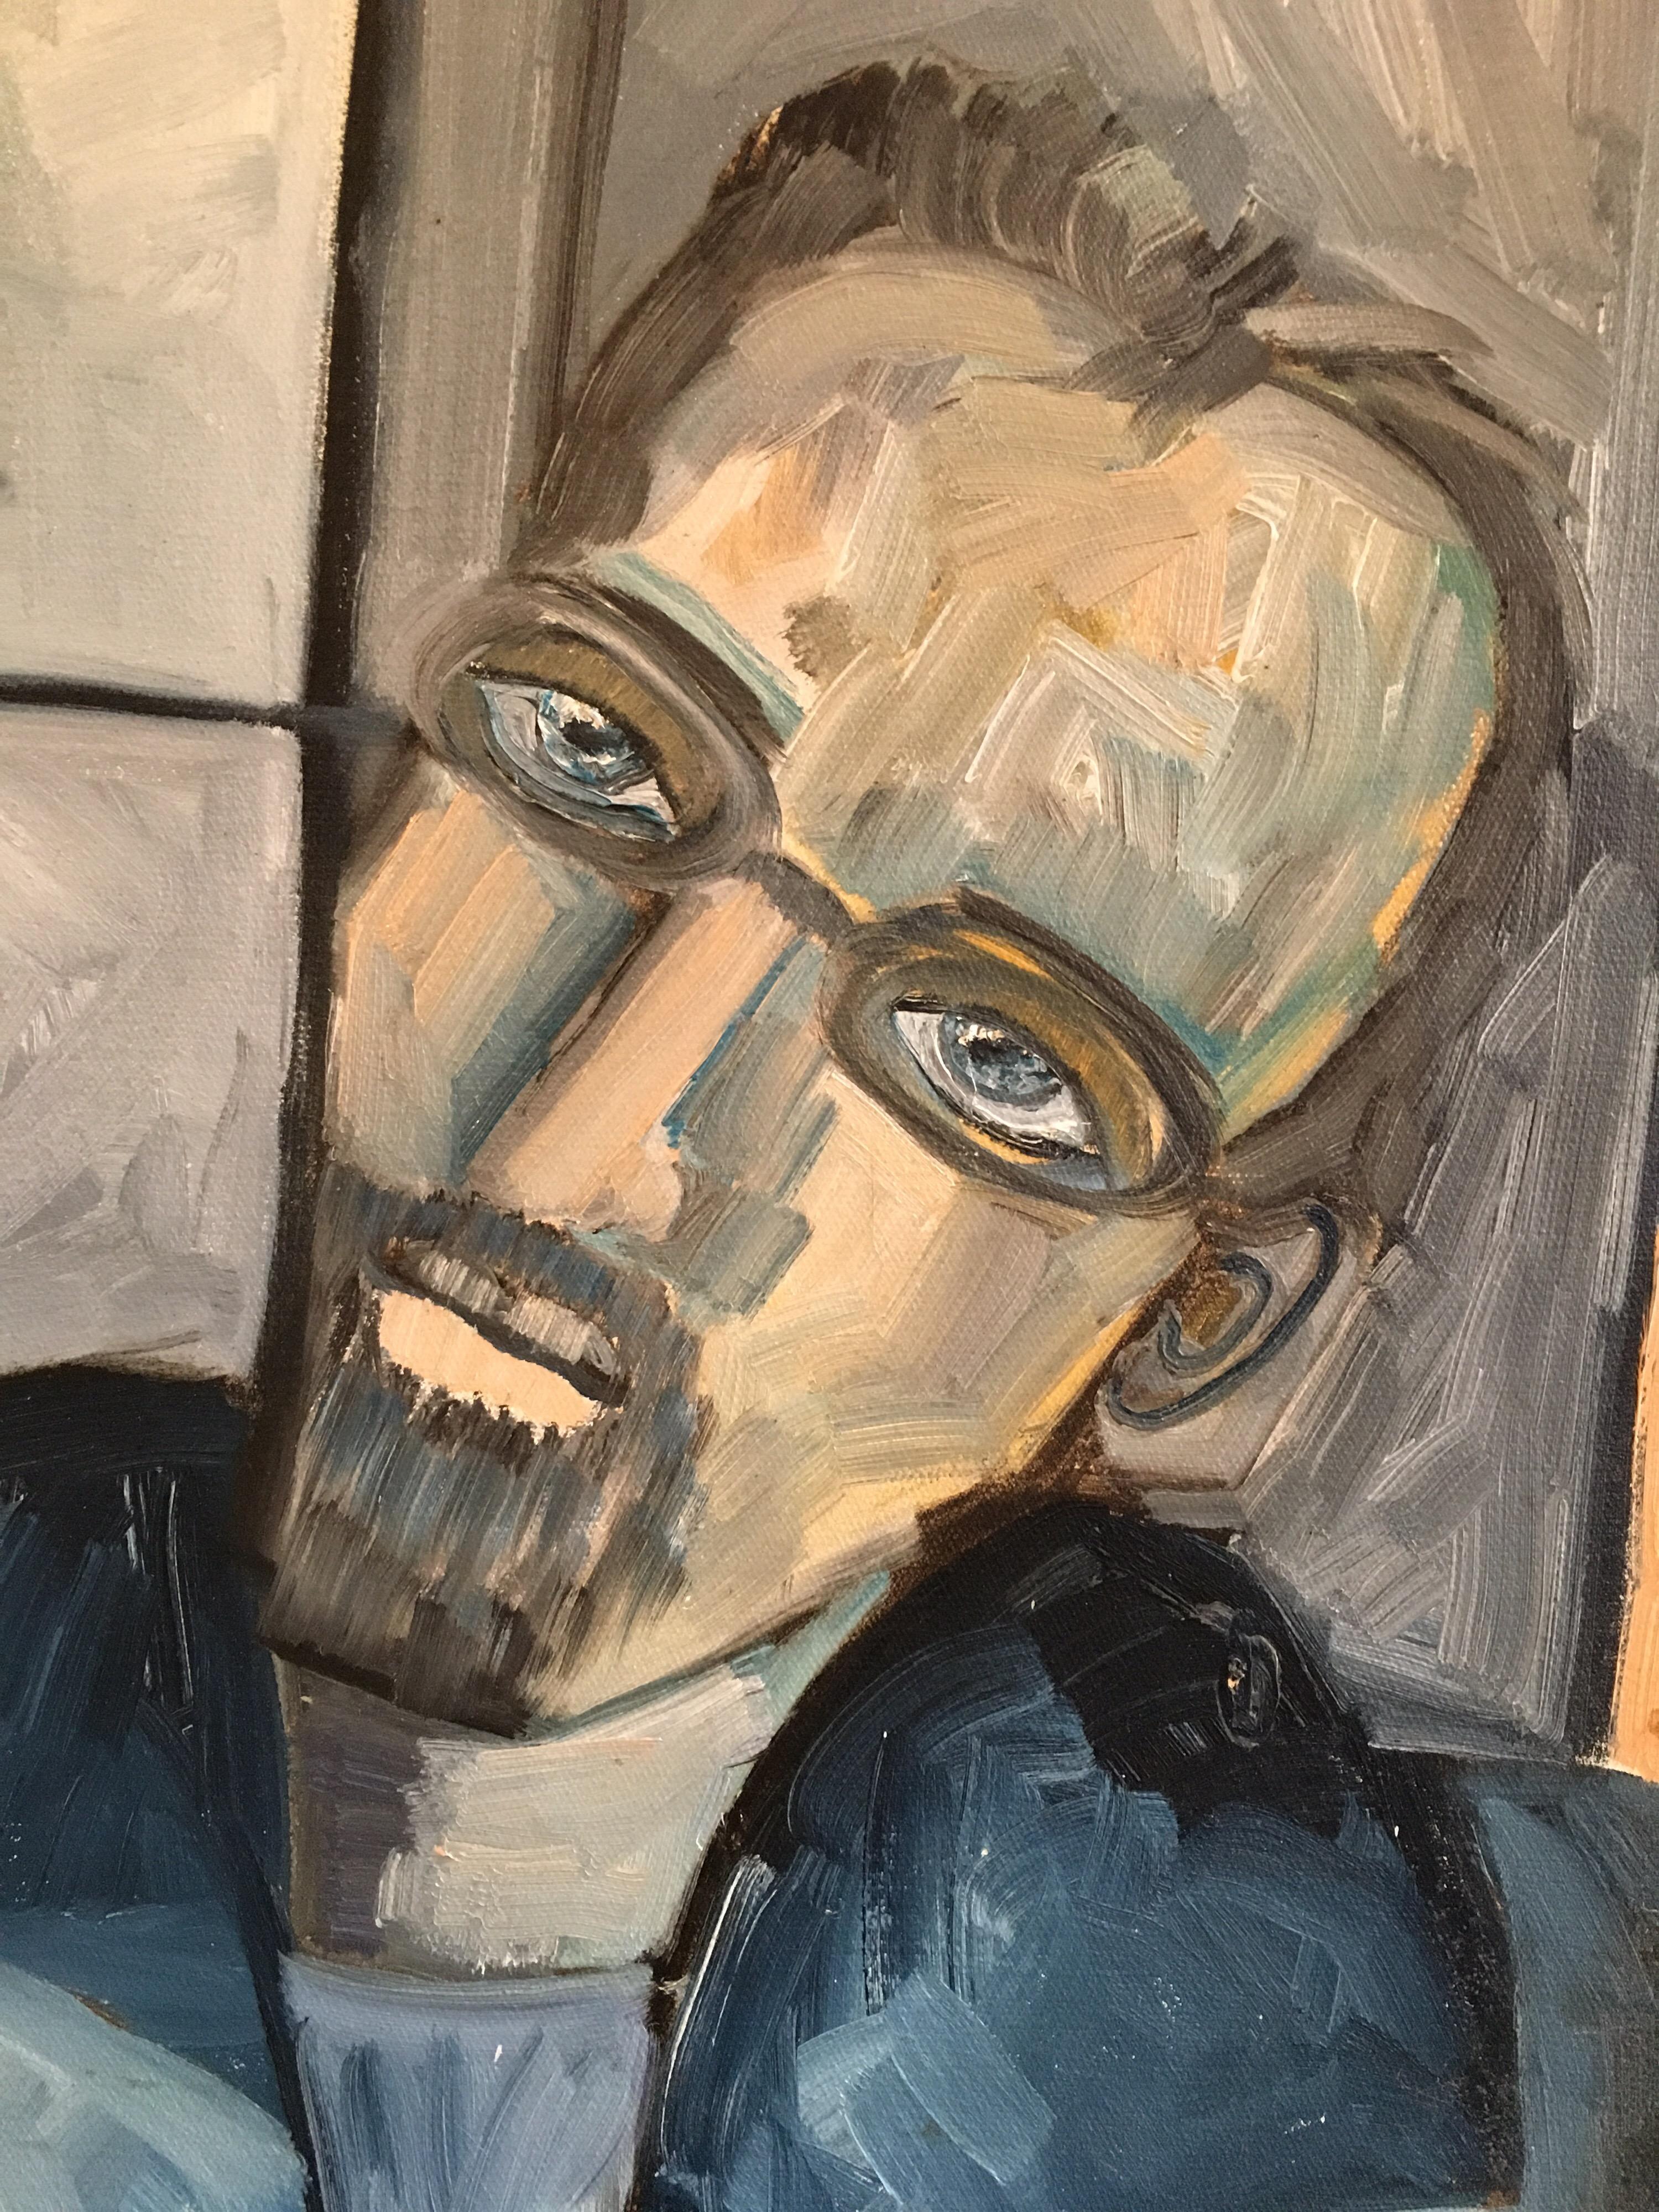 Stylish Man in Glasses, Portrait, Blue Colour ,Original Oil Painting 
By French artist Beatrice Werlie, early 21st Century
Signed by the artist on the lower left hand corner
Oil painting on canvas, unframed
Canvas size: 26 x 21 inches

Sensational